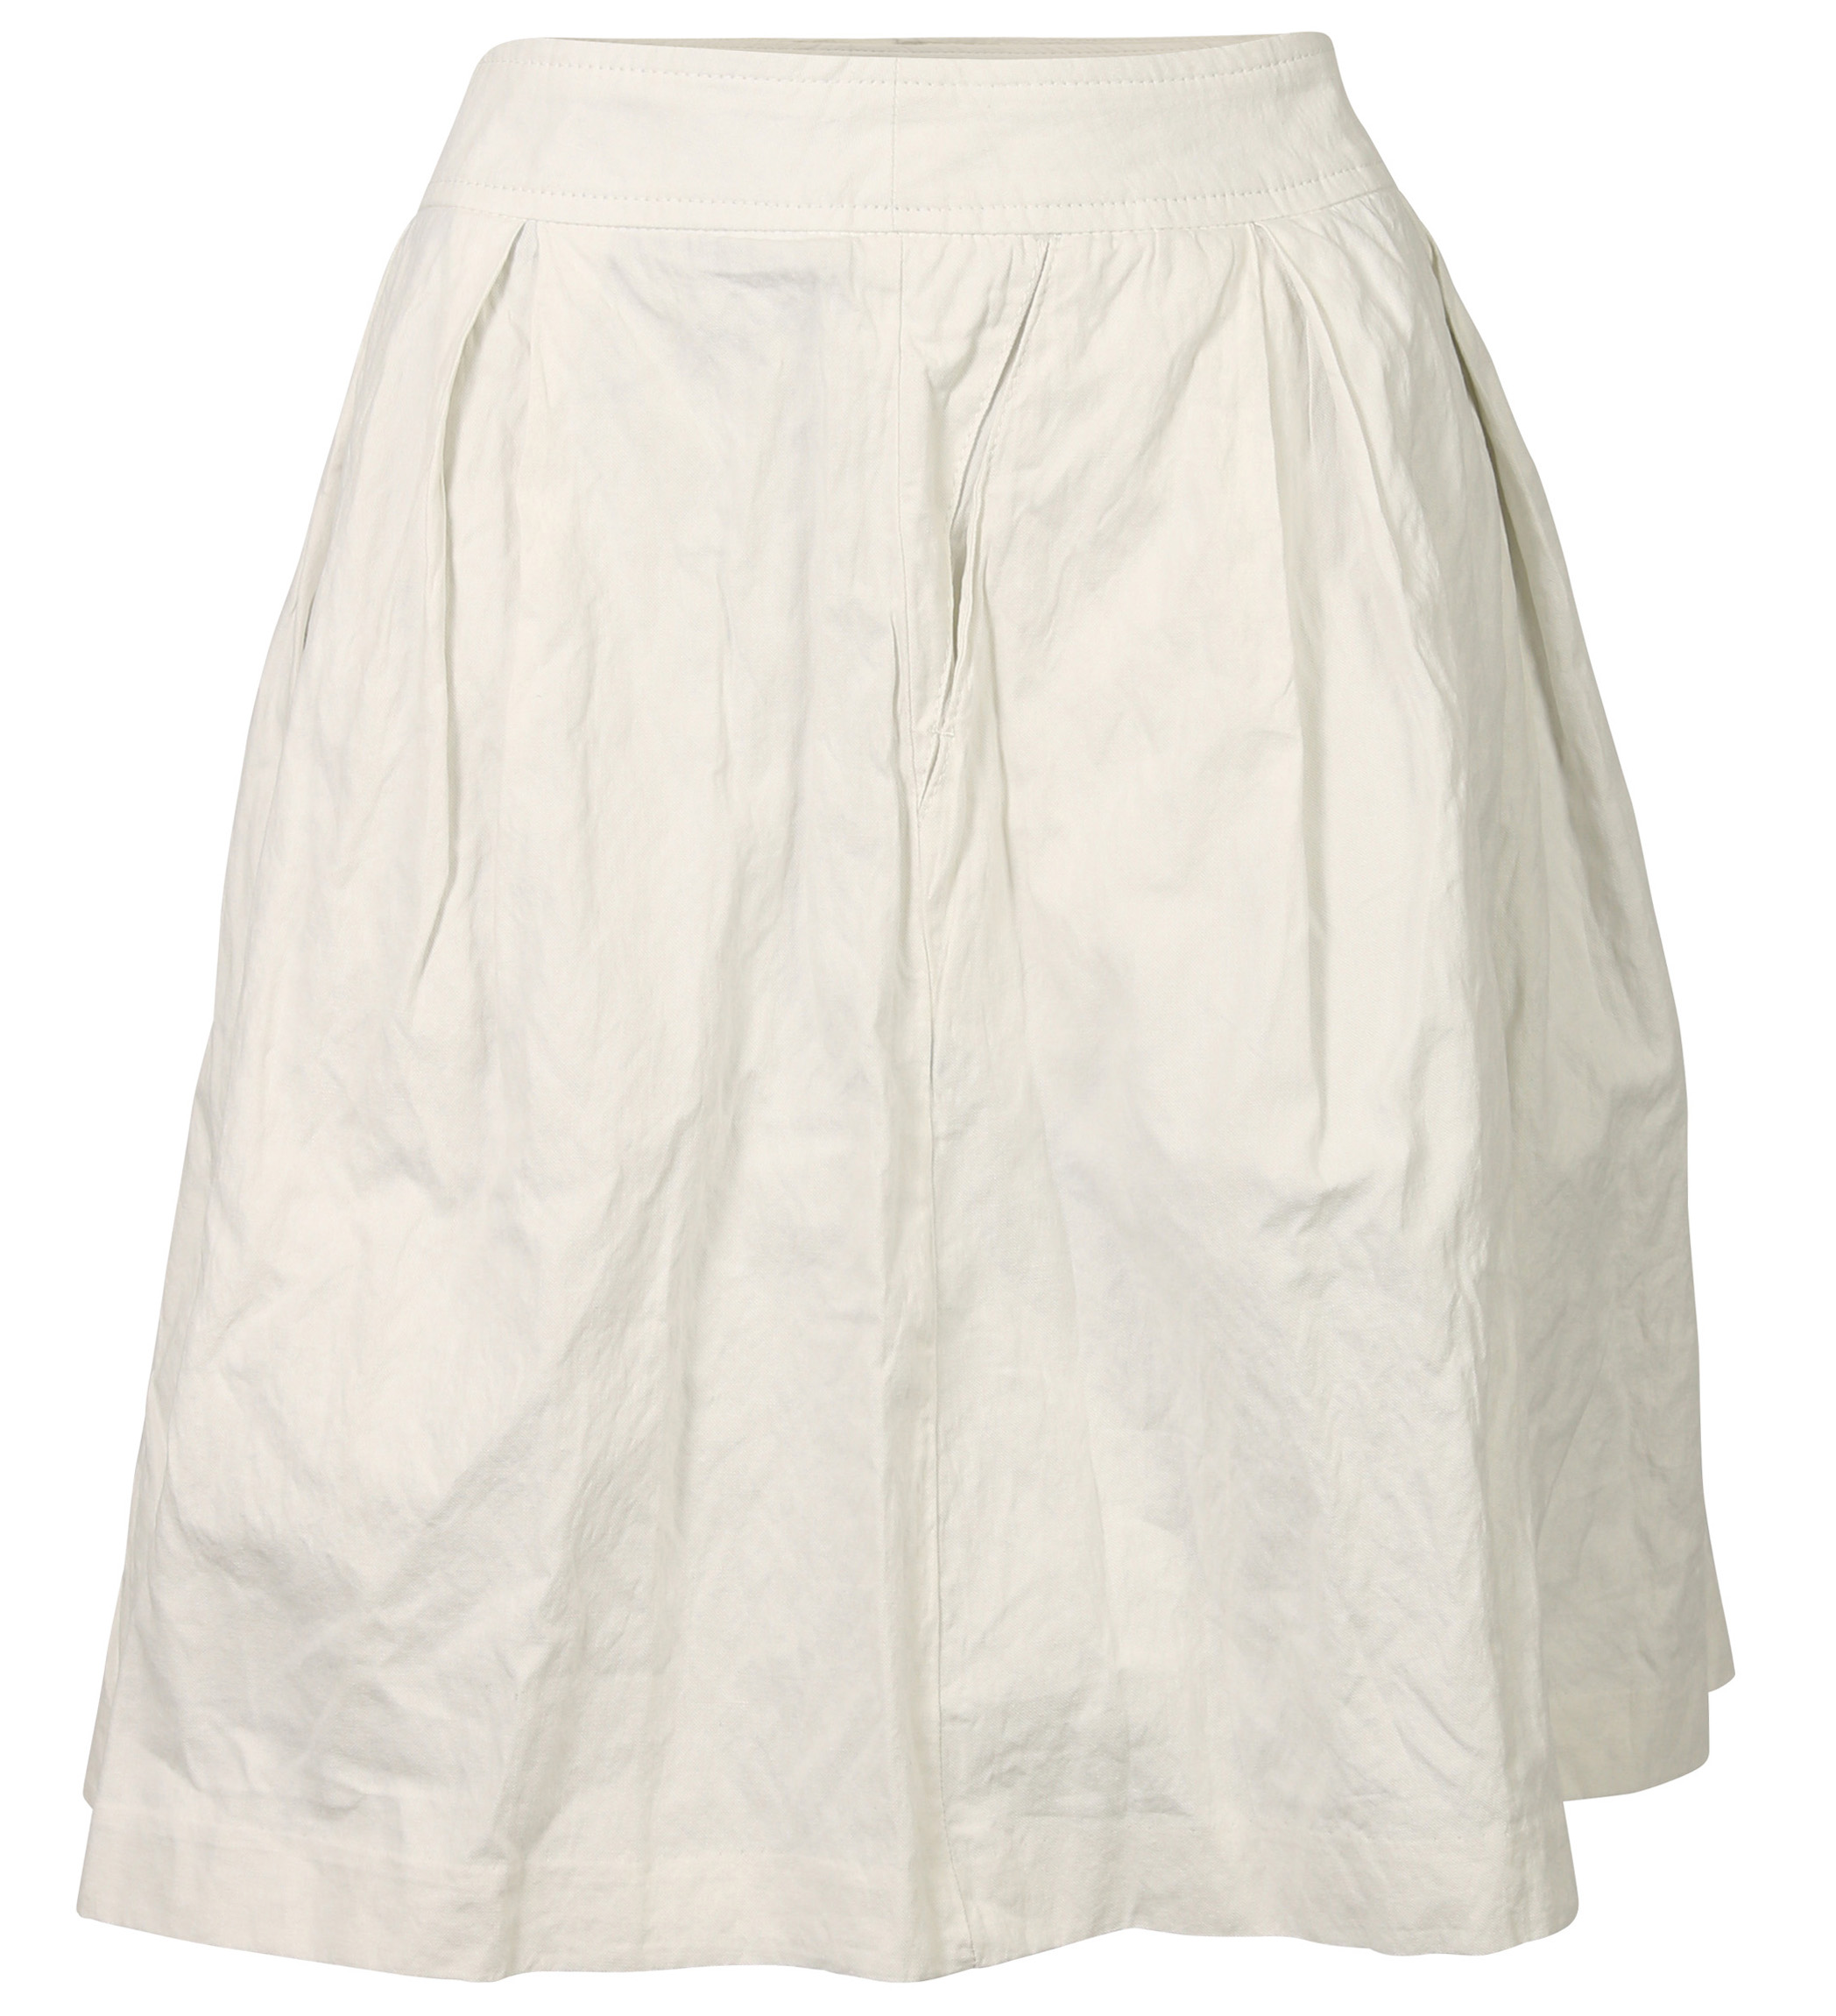 Hannes Roether Skirt Offwhite L